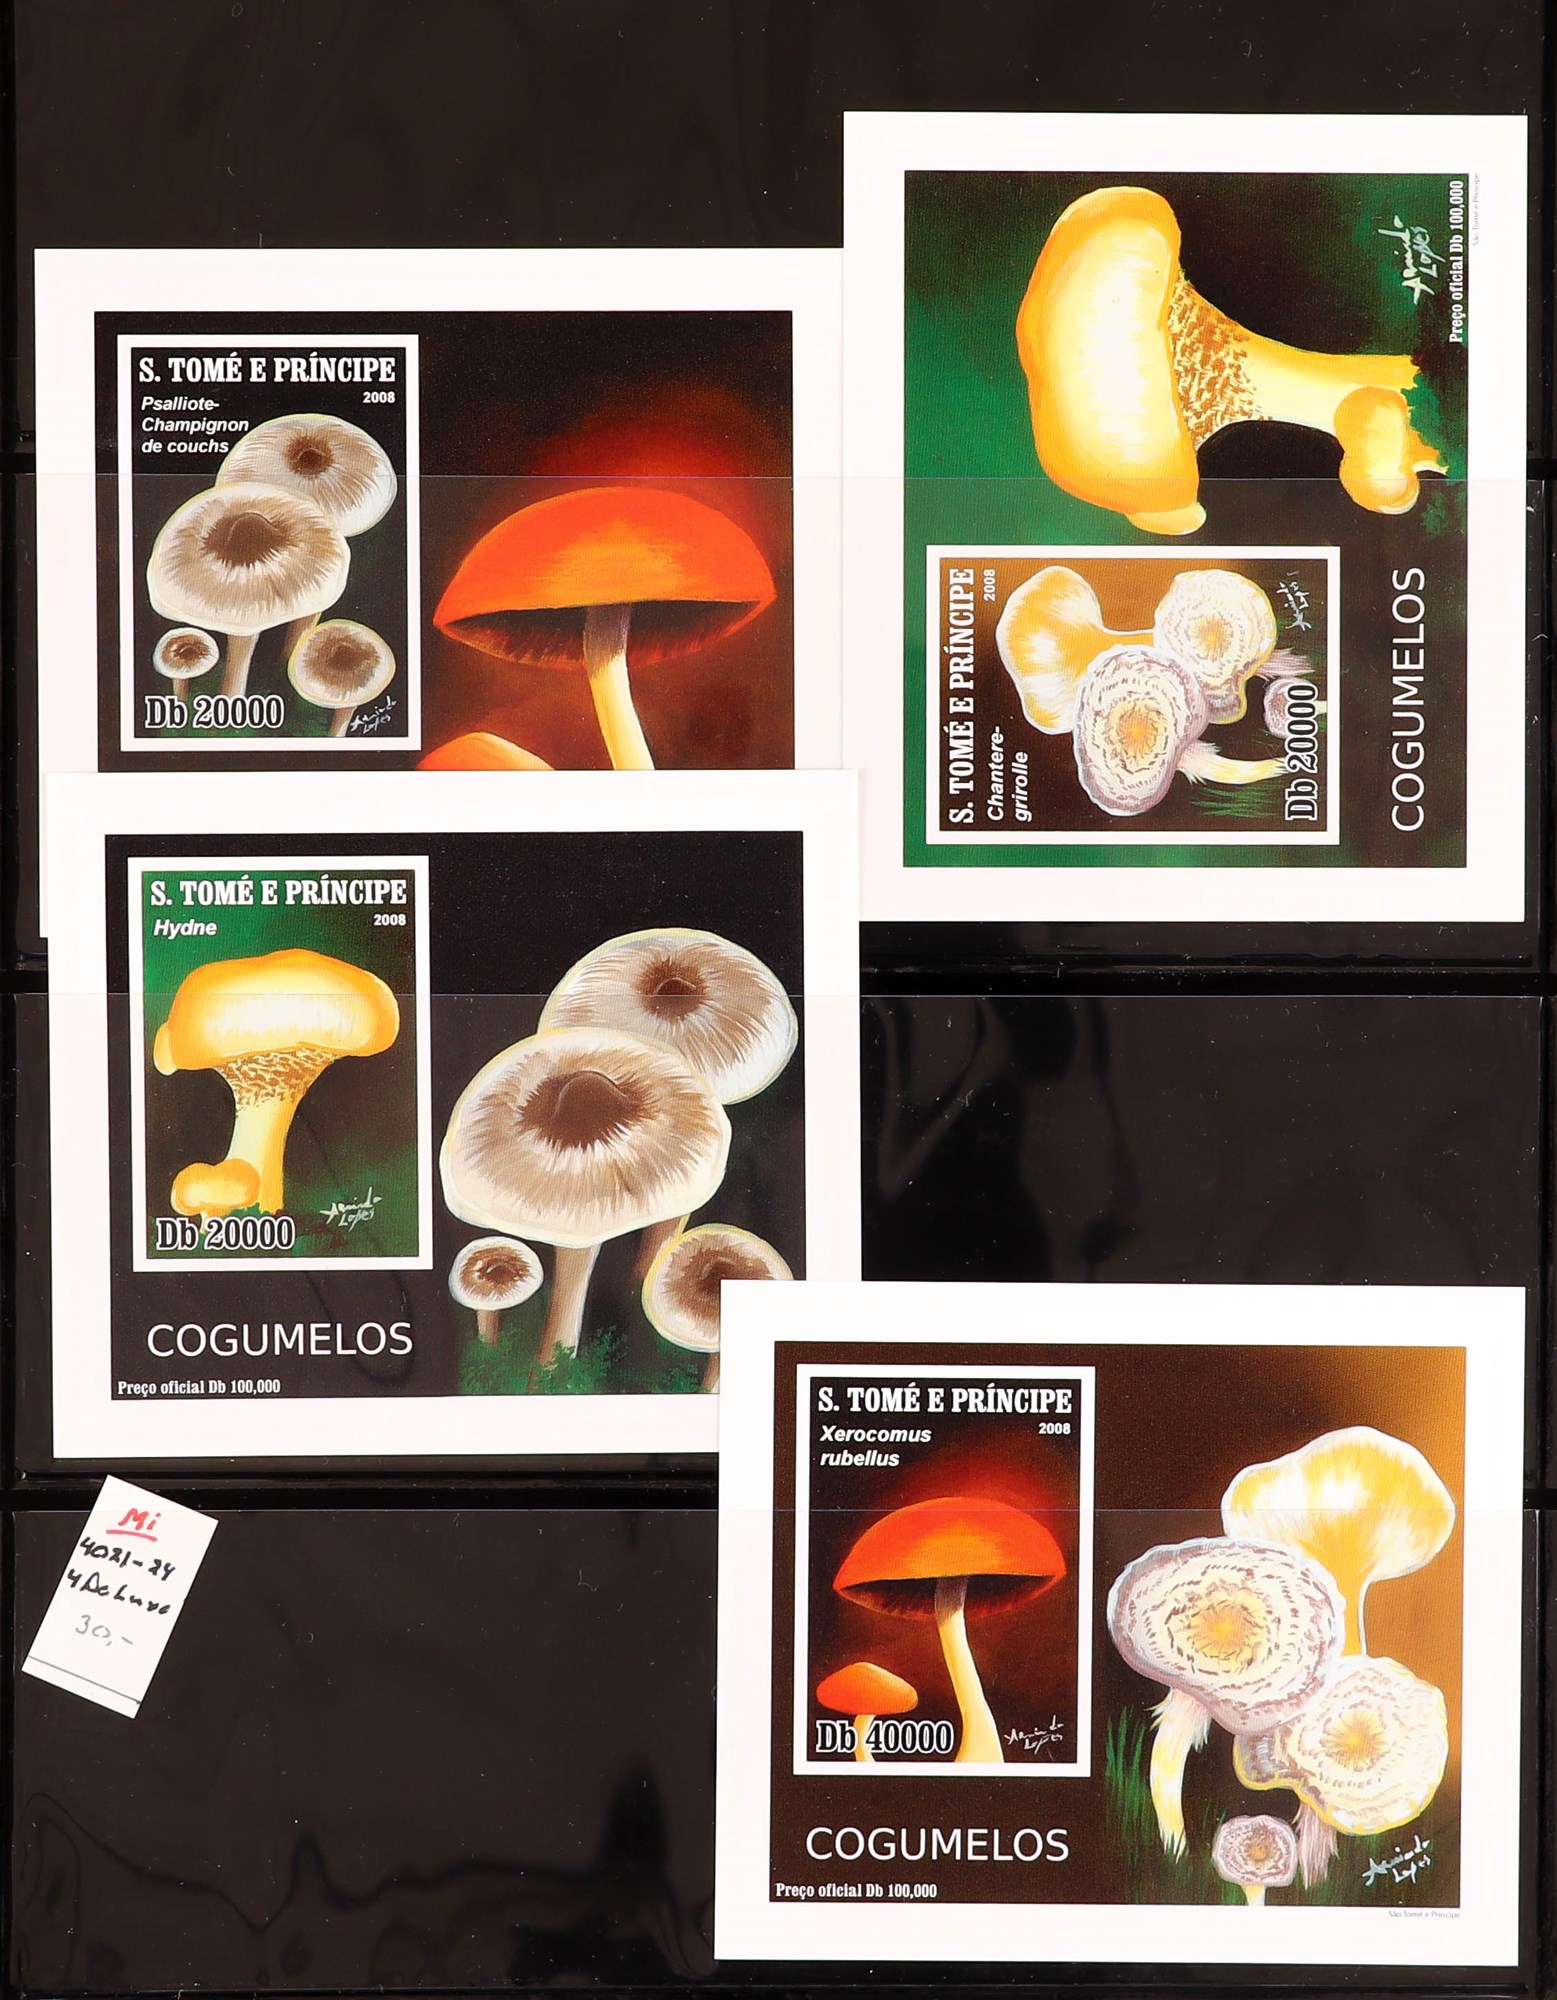 PORTUGUESE COLONIES FUNGI STAMPS OF ST THOMAS & PRINCE ISLANDS 1984 - 2014 never hinged mint - Image 3 of 30